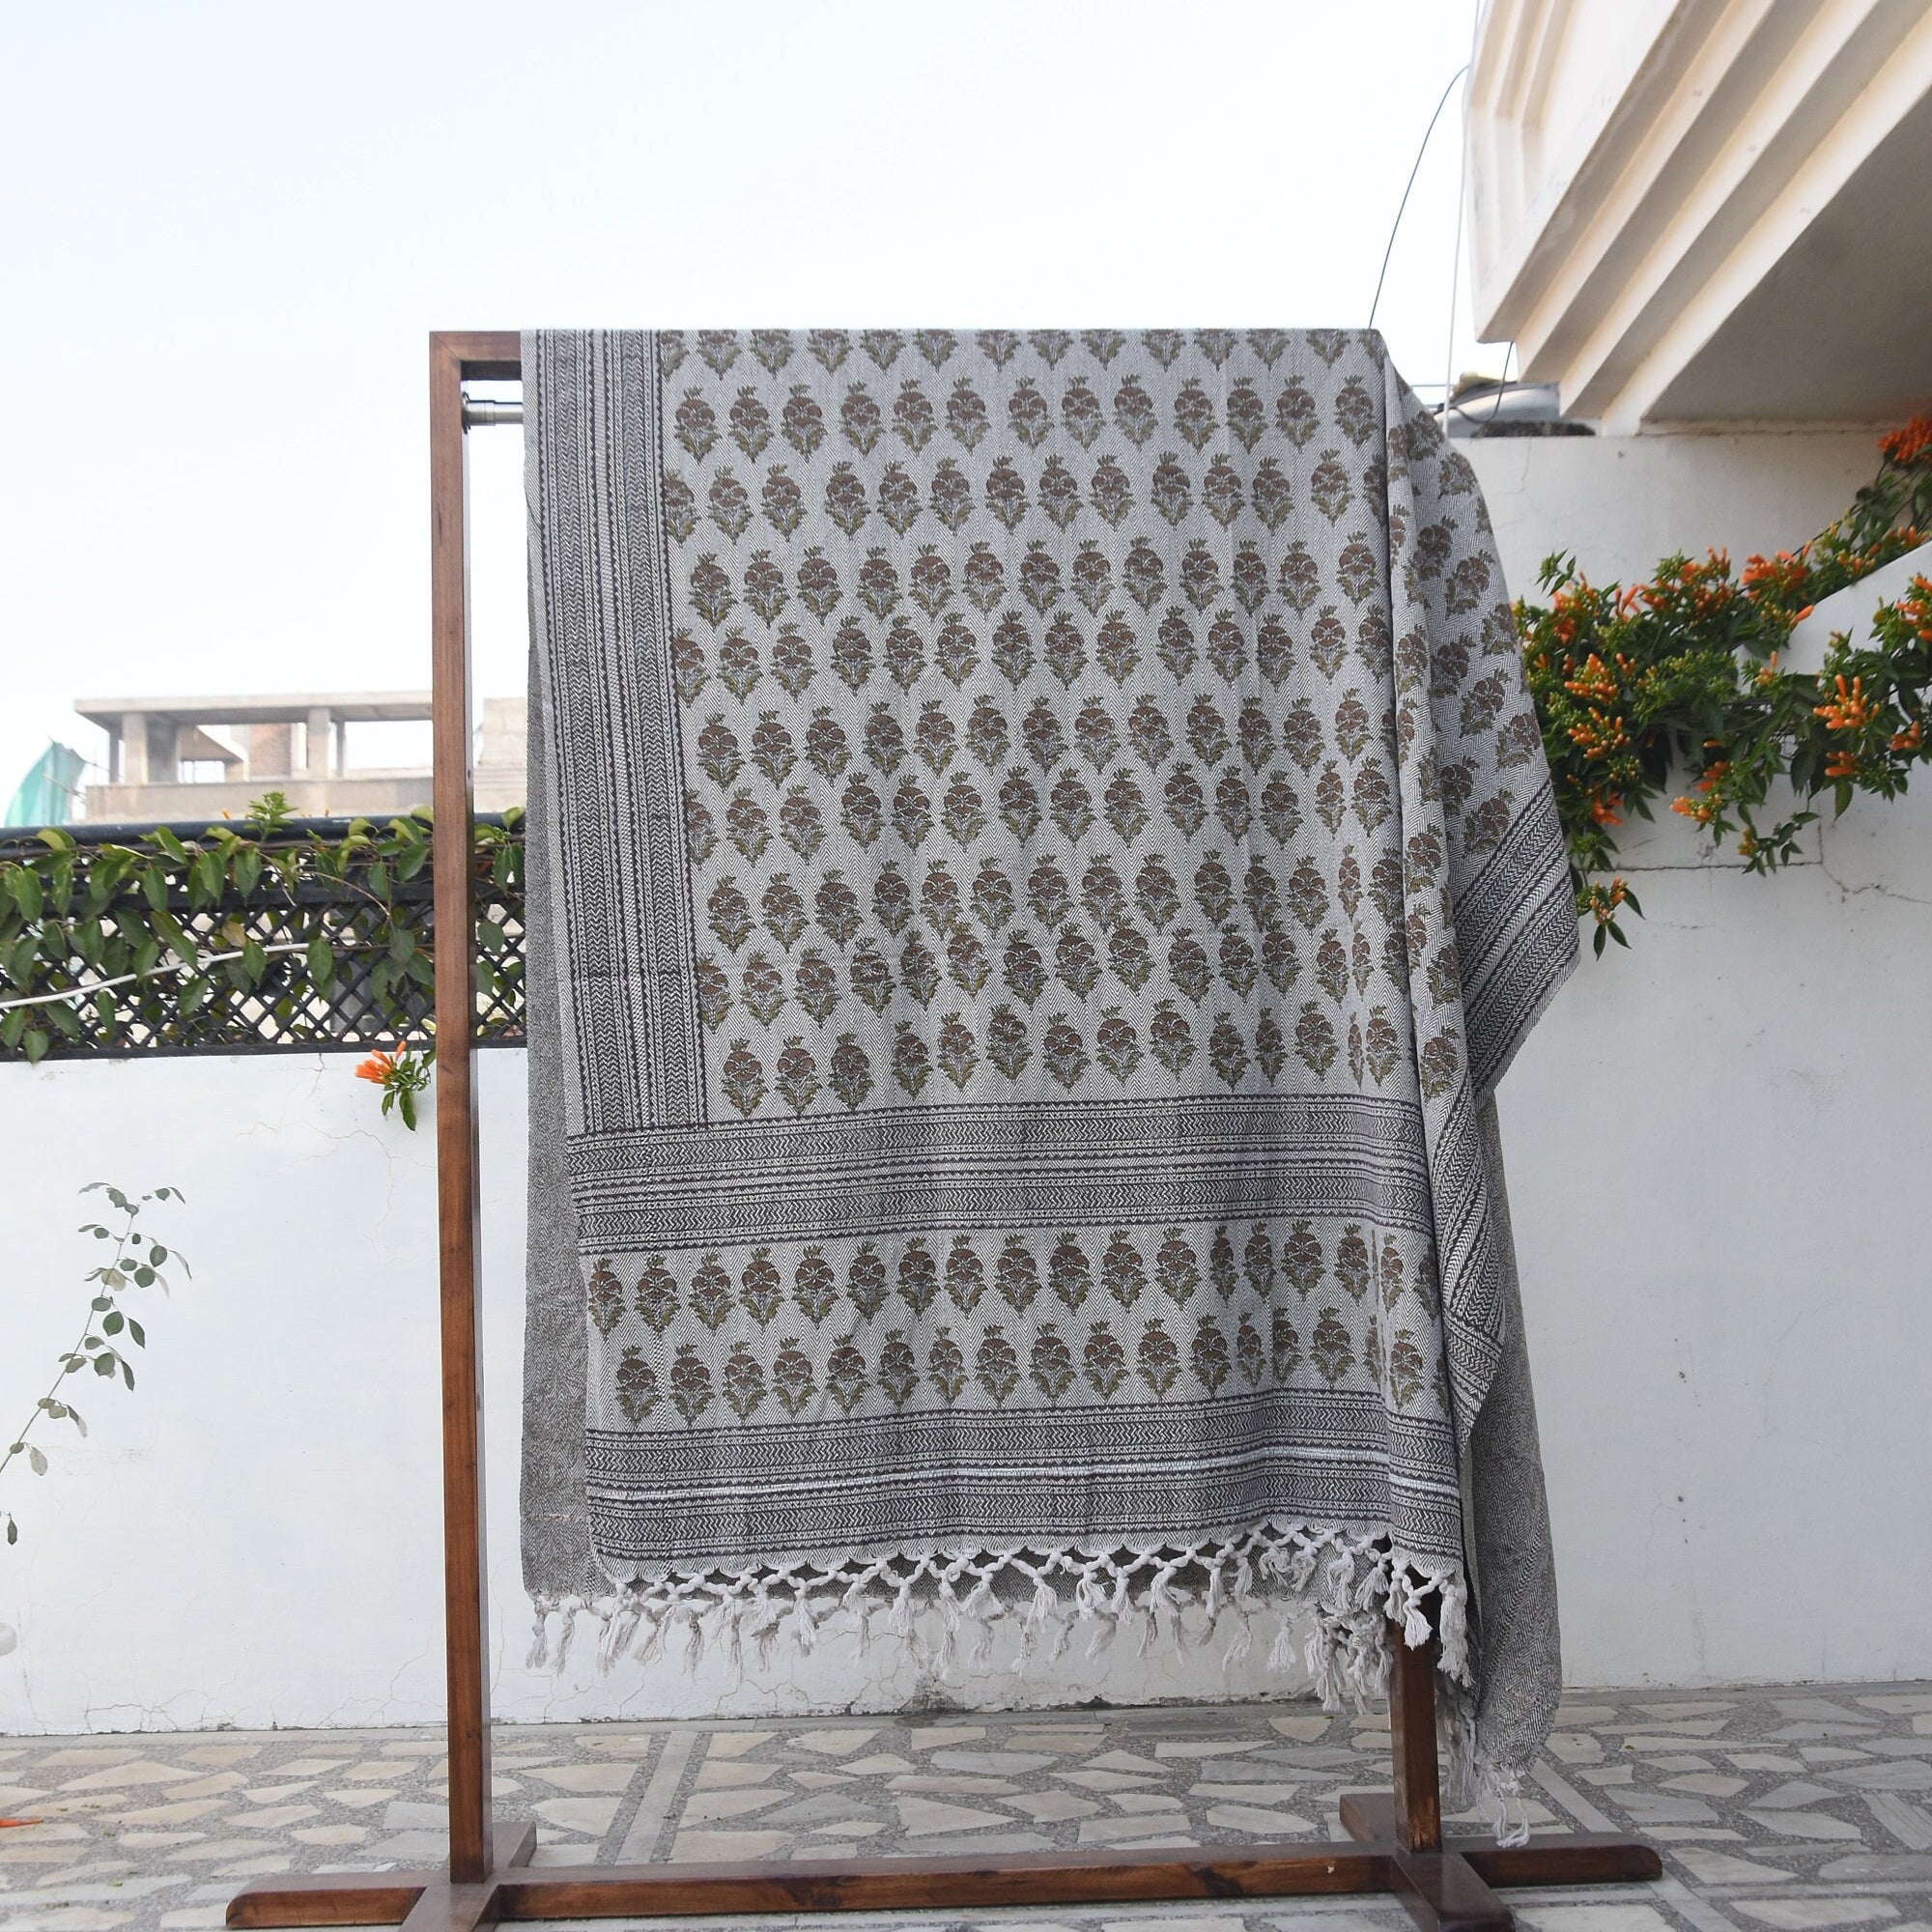 Handmade block printed throw for couch, bed throws, throws and blankets, handwoven handloom fabric, handwoven throws - MOR MUKUT